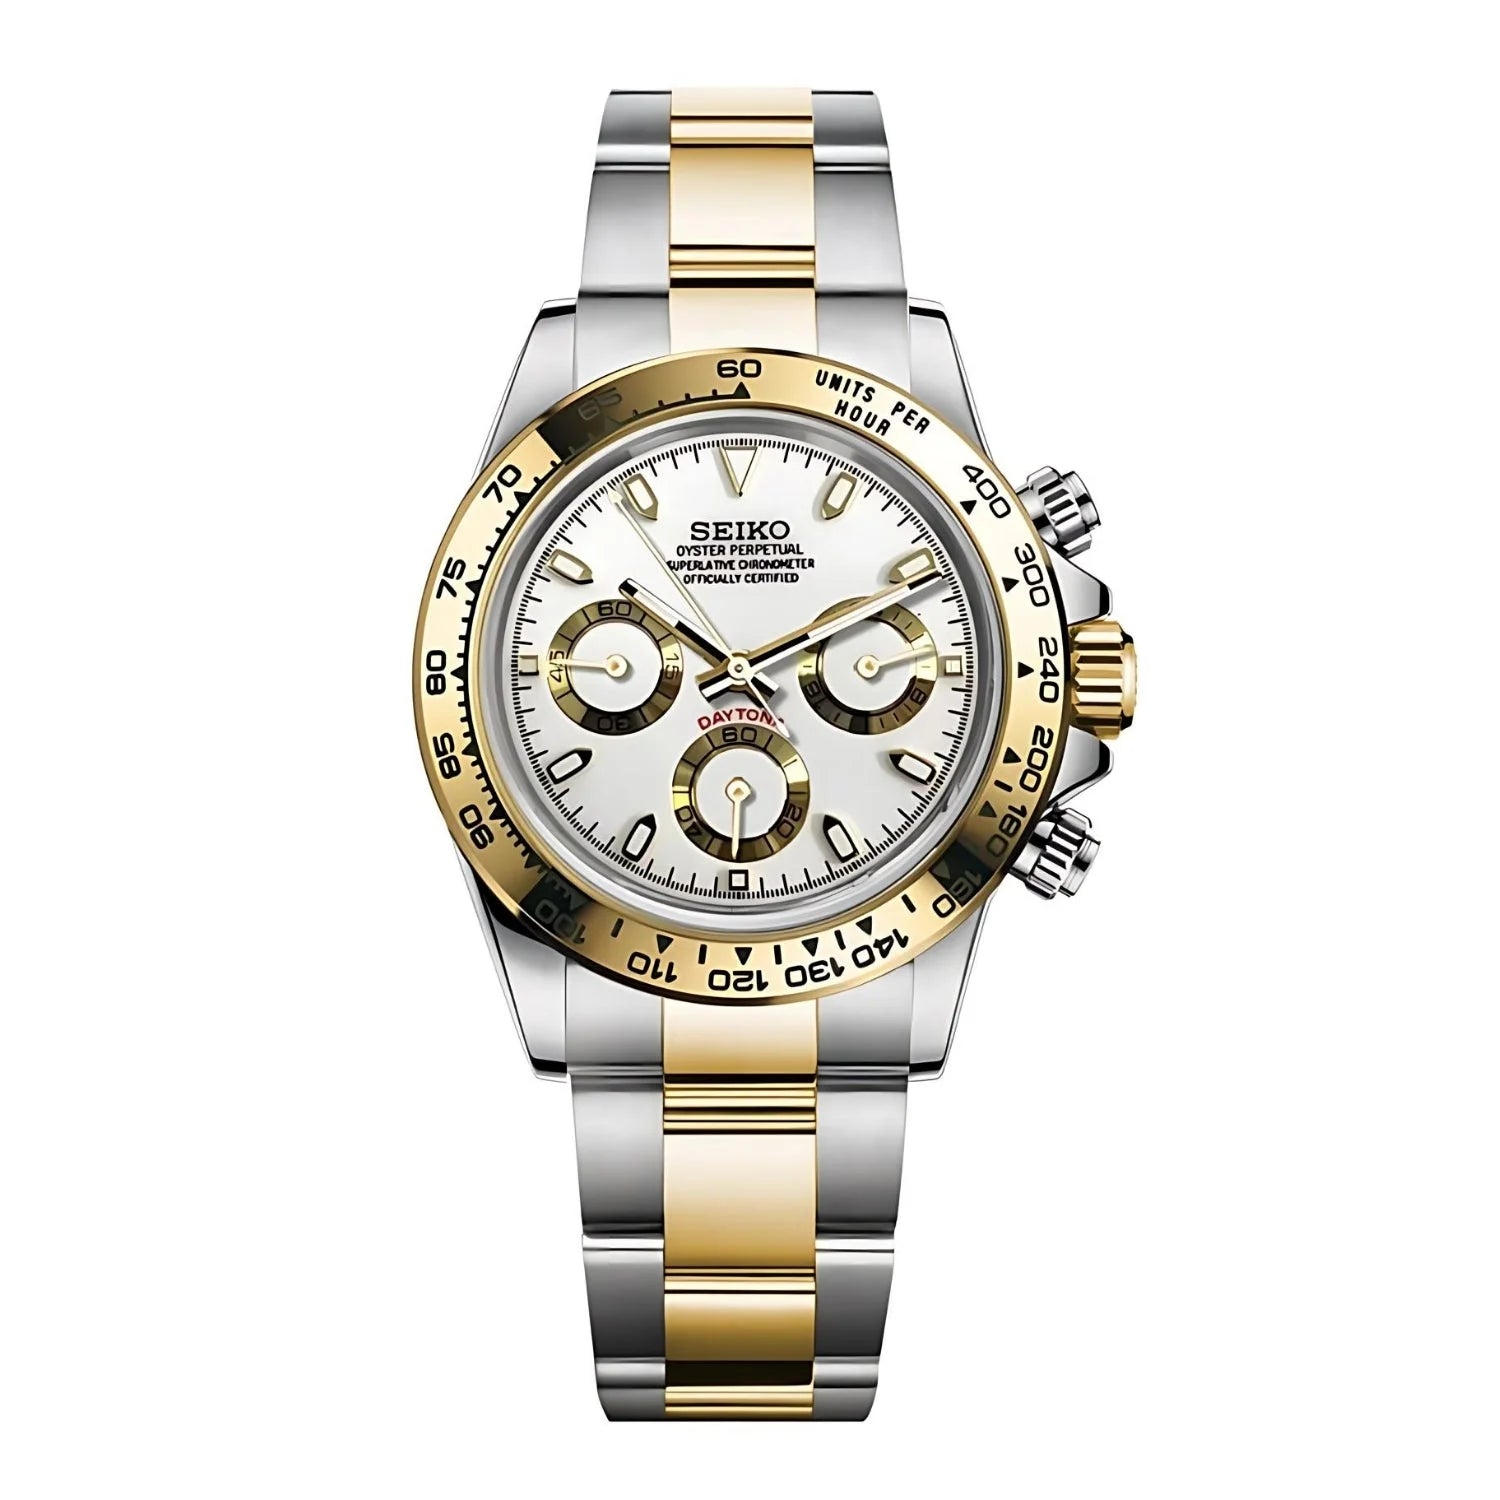 Seitona Silver - Gold (white) Luxury Wristwatch With Vk63 Hybrid Movement And 904l Stainless Steel